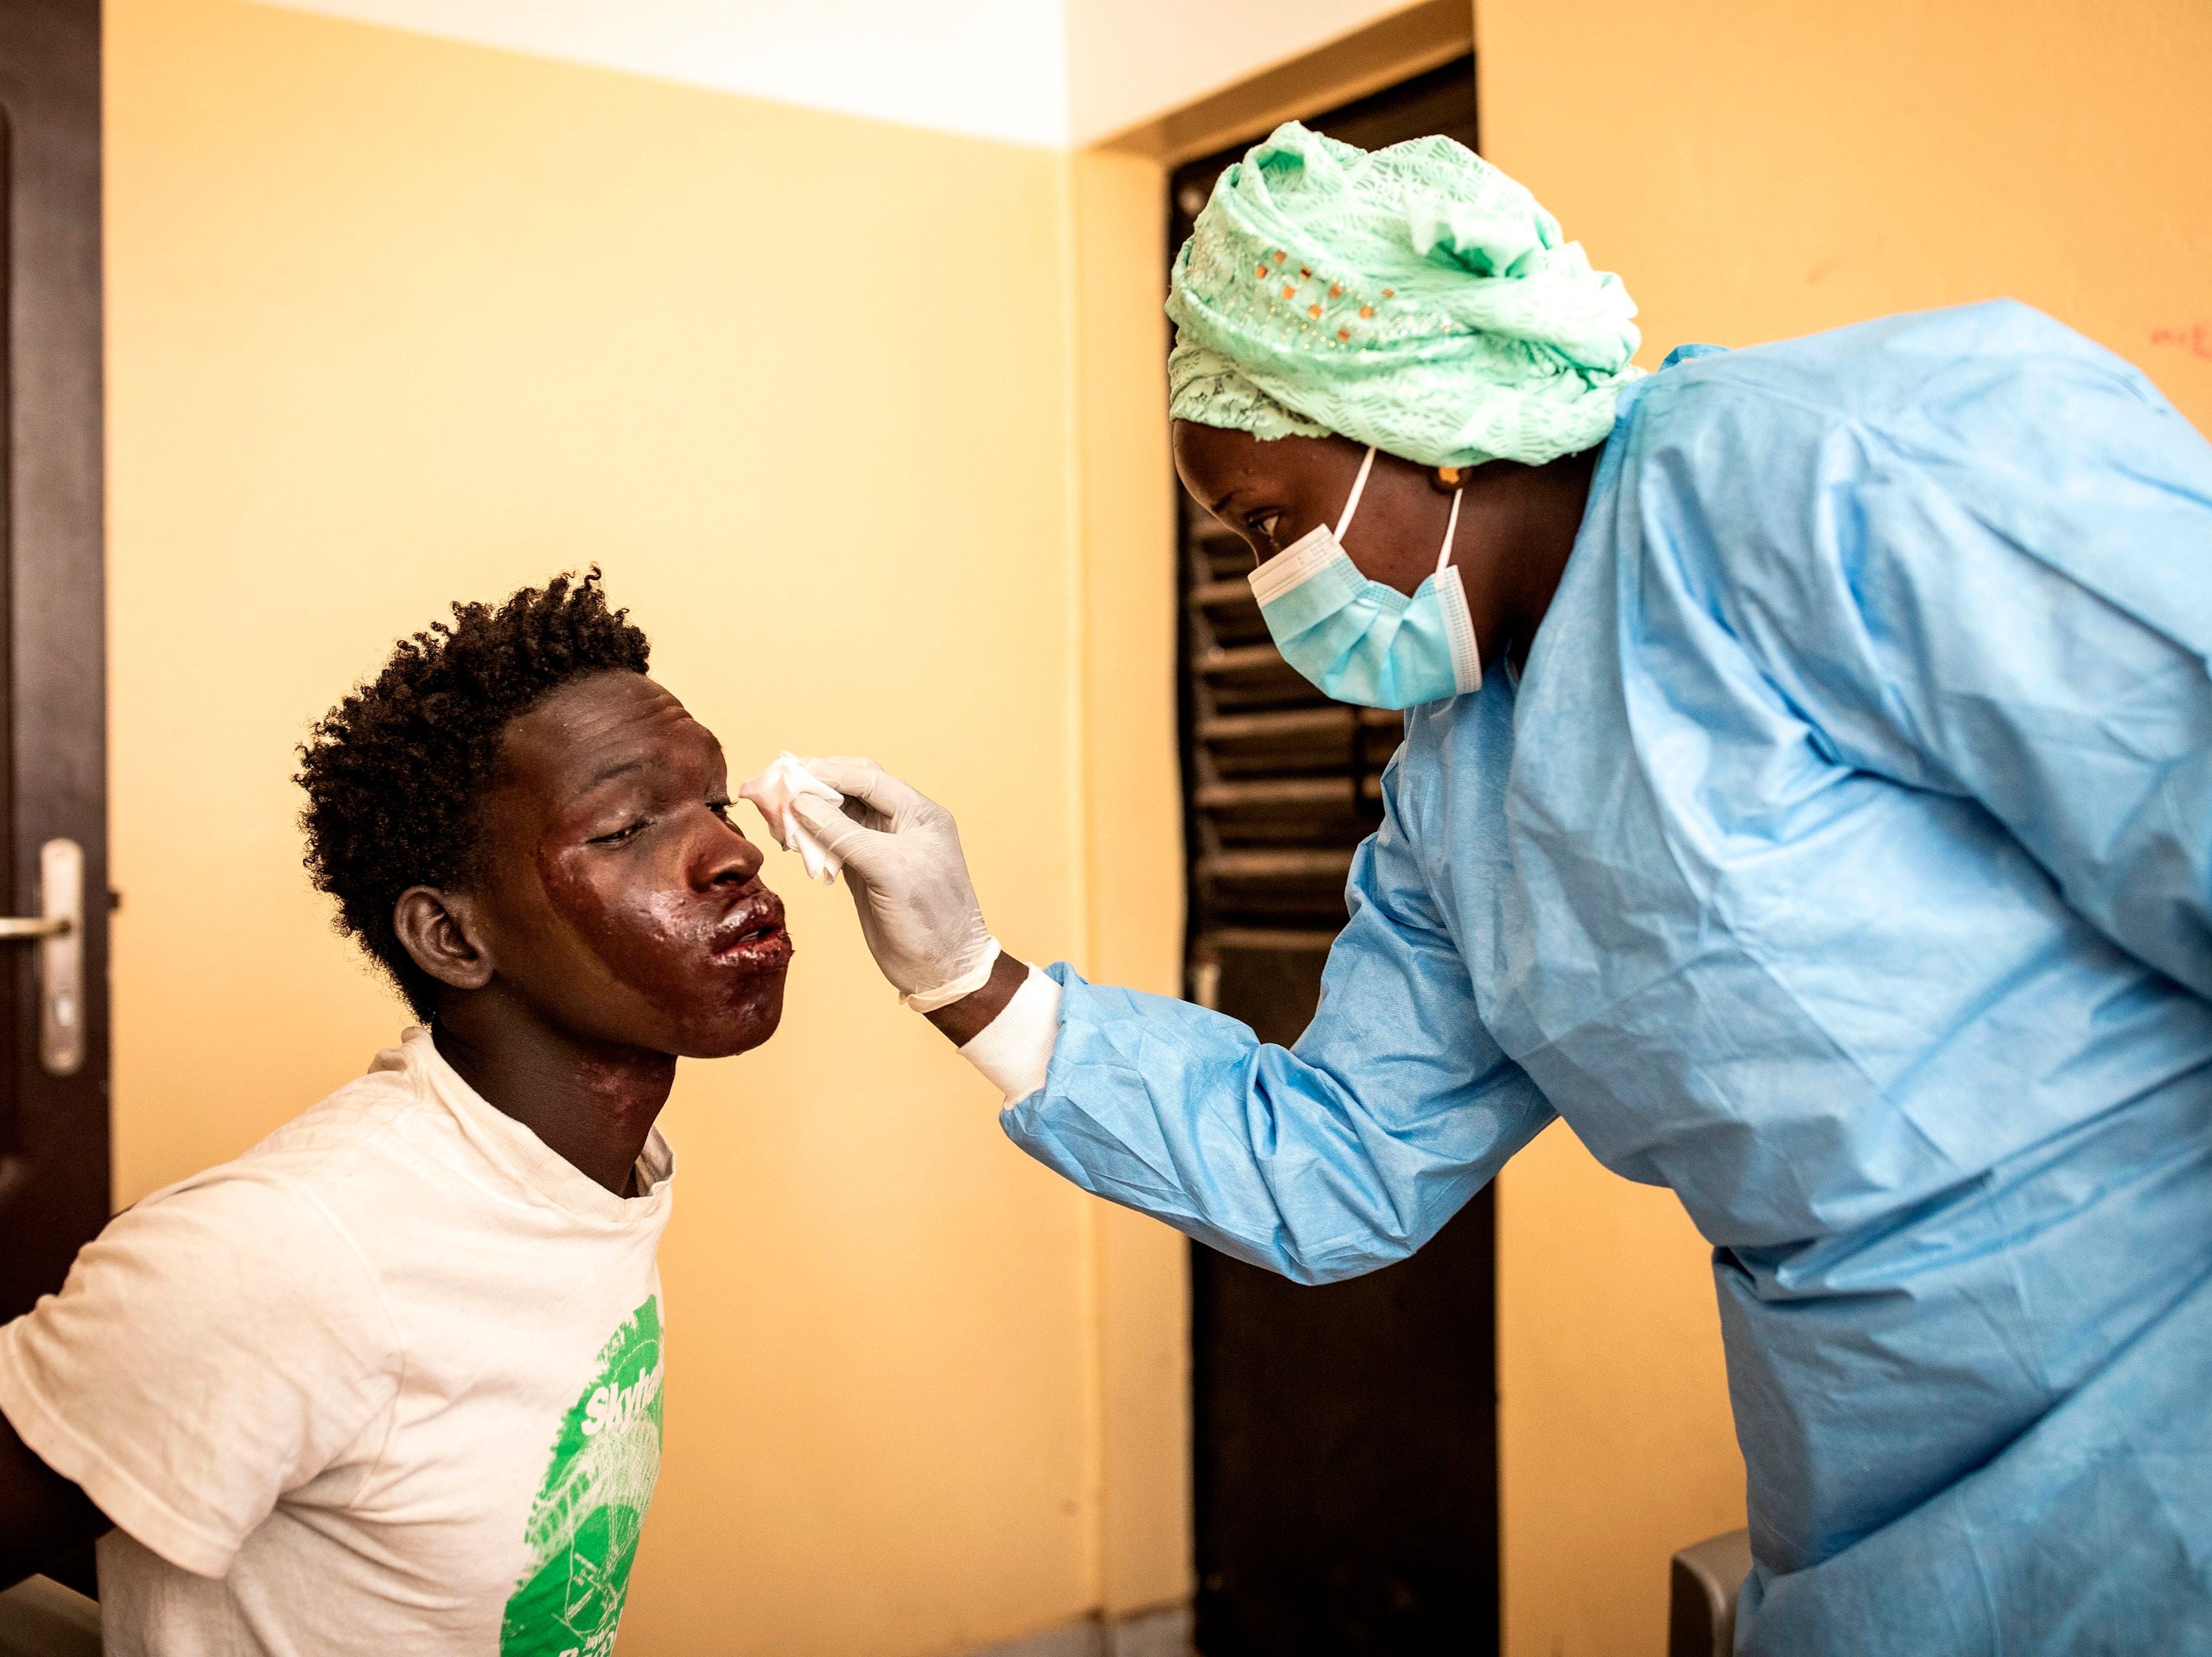 A fisherman receives medical treatment for a mysterious skin disease in Dakar